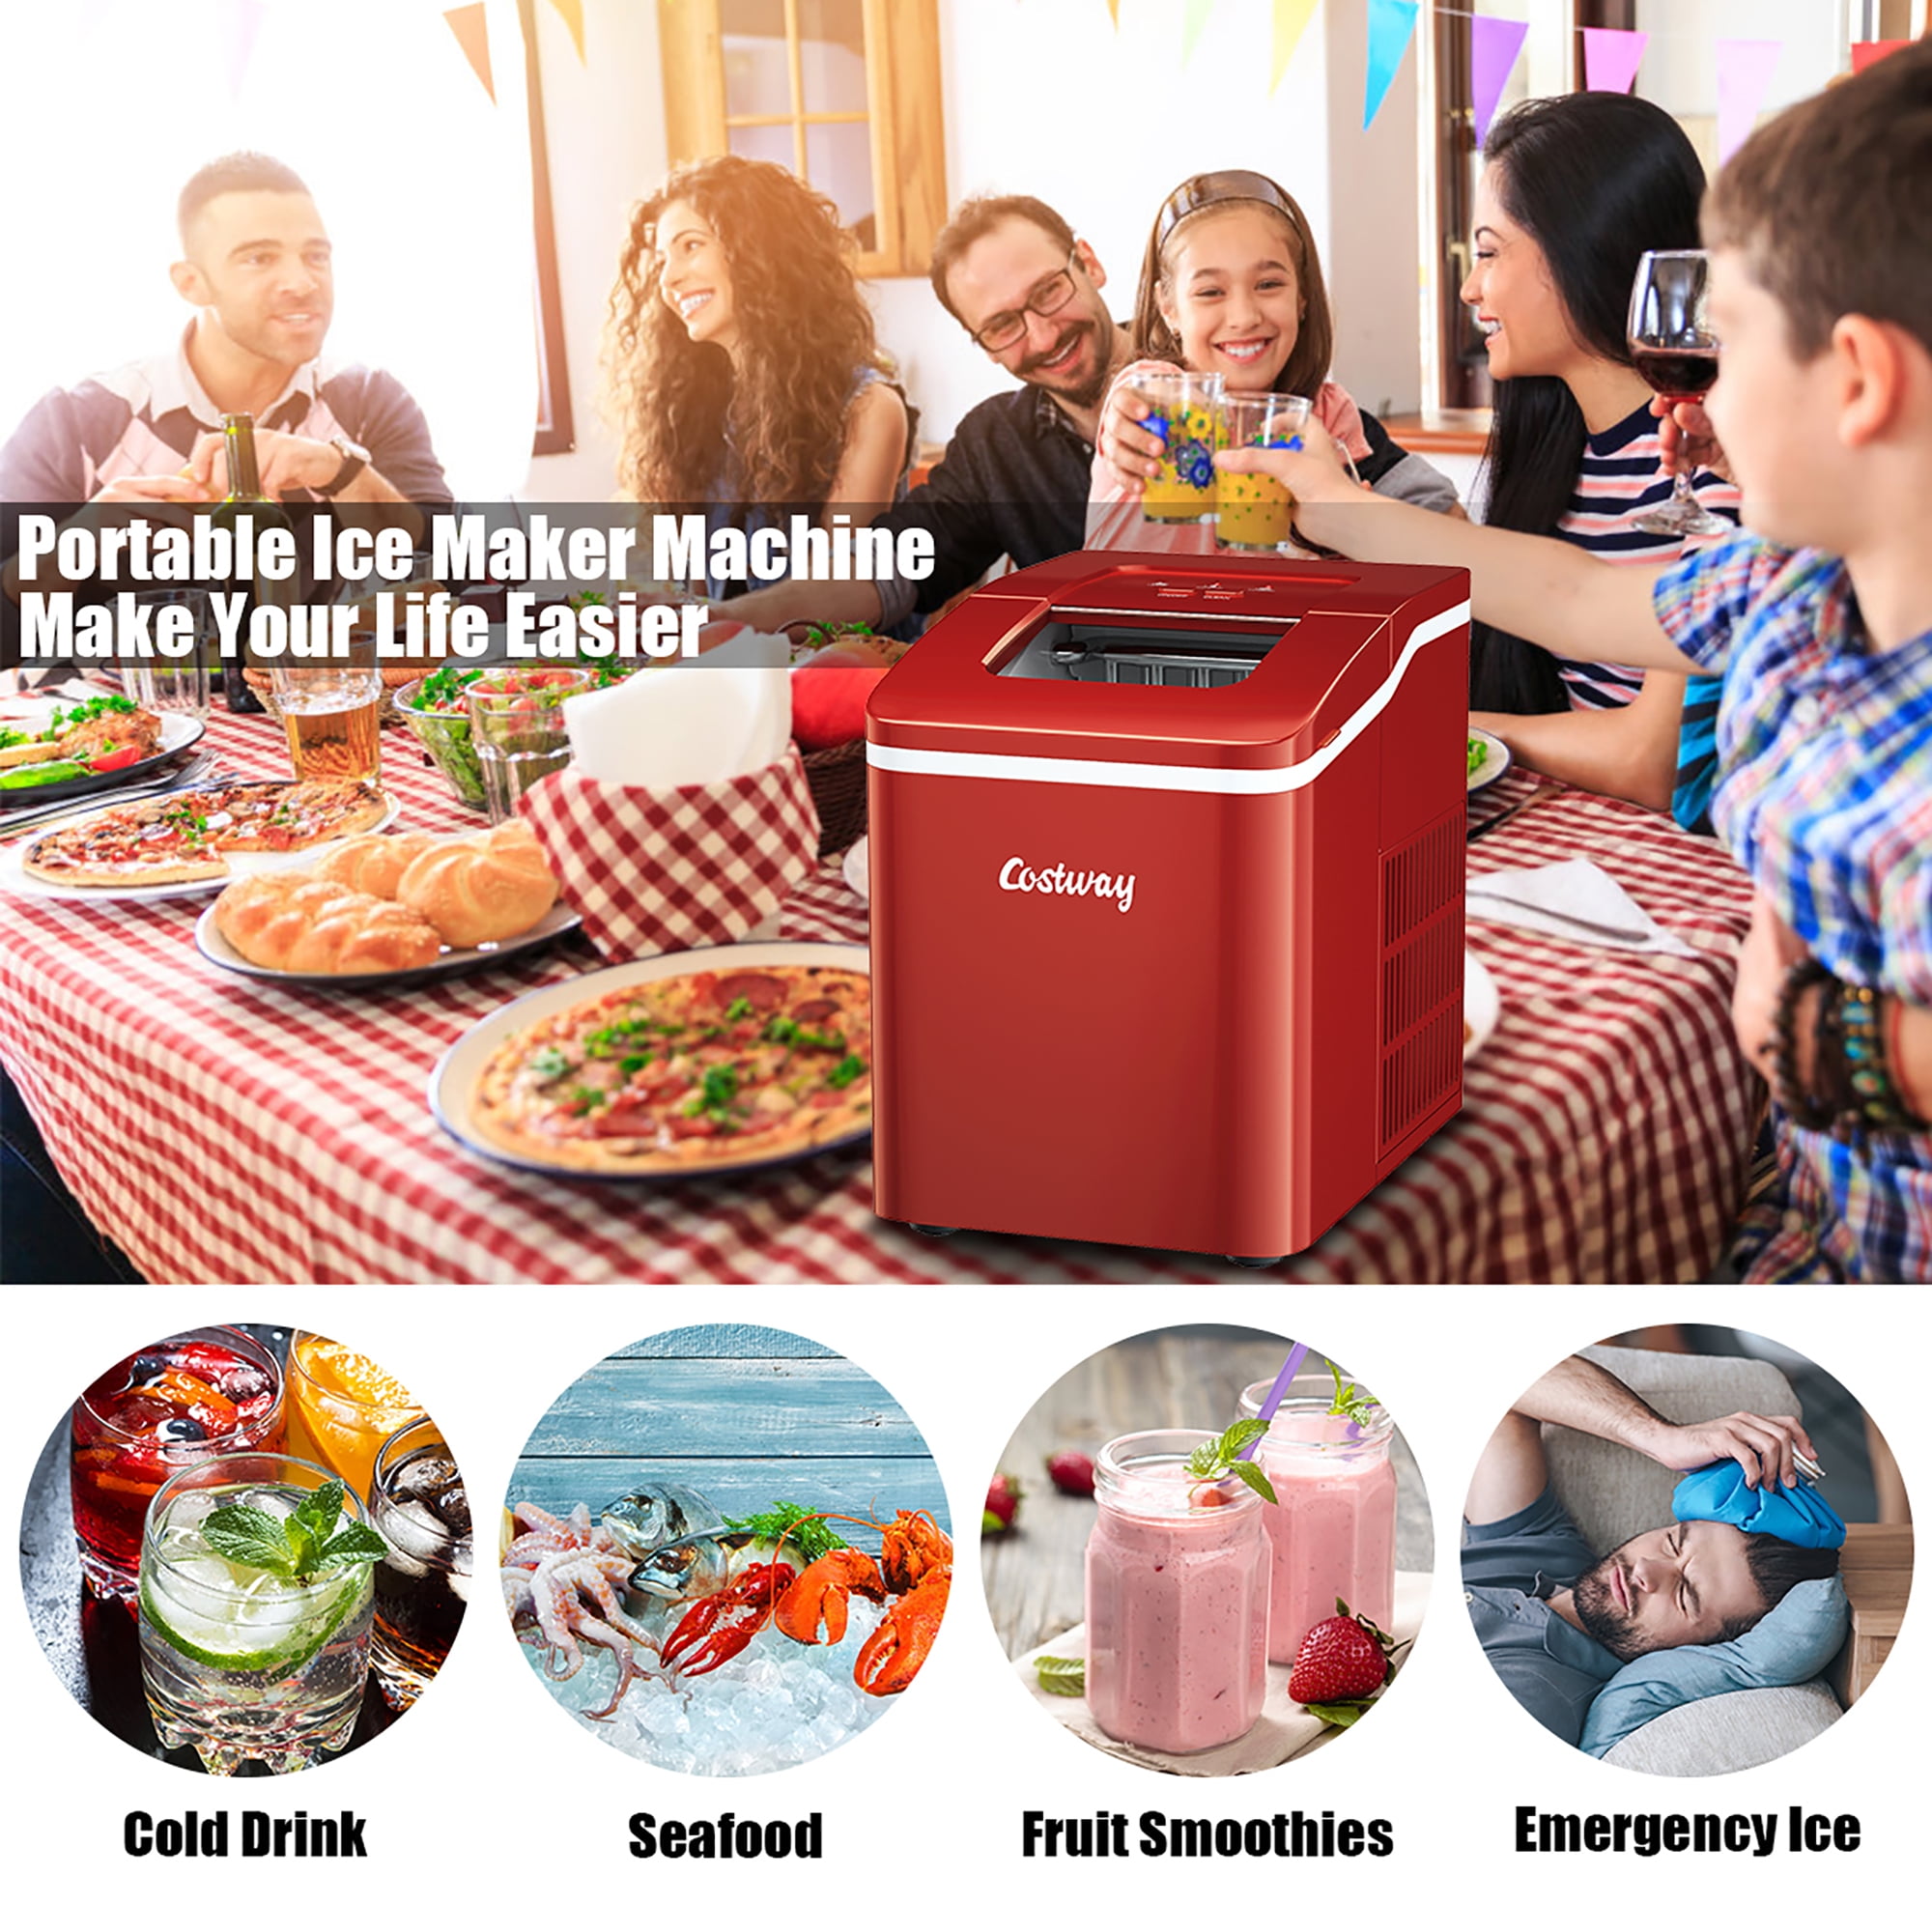 COSTWAY Countertop Ice Maker, 40LBS/24H Portable Compact Ice Machine with  Top Inlet Hole, Auto Self-Cleaning Function, 24 pcs Ice Cube in 15 Mins,  Ice